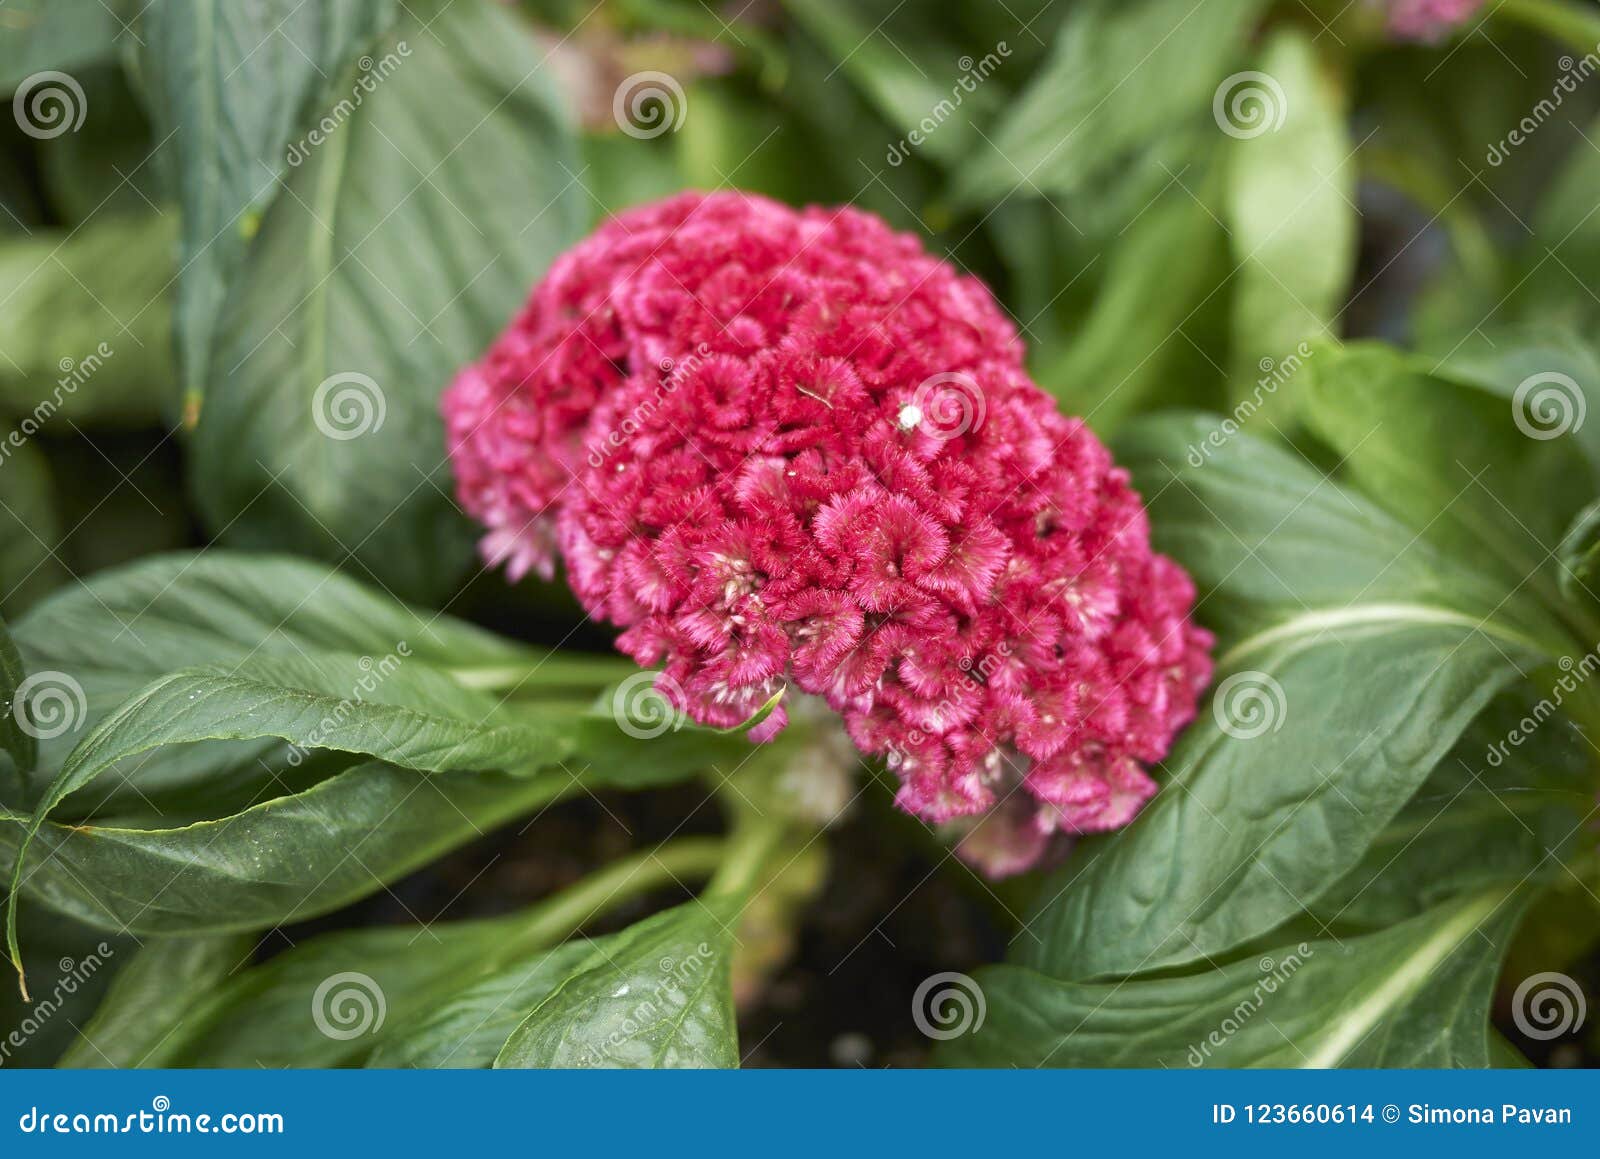 Flower Close Up Of Celosia Cristata Plant Stock Photo Image Of Leaves Colorful 123660614